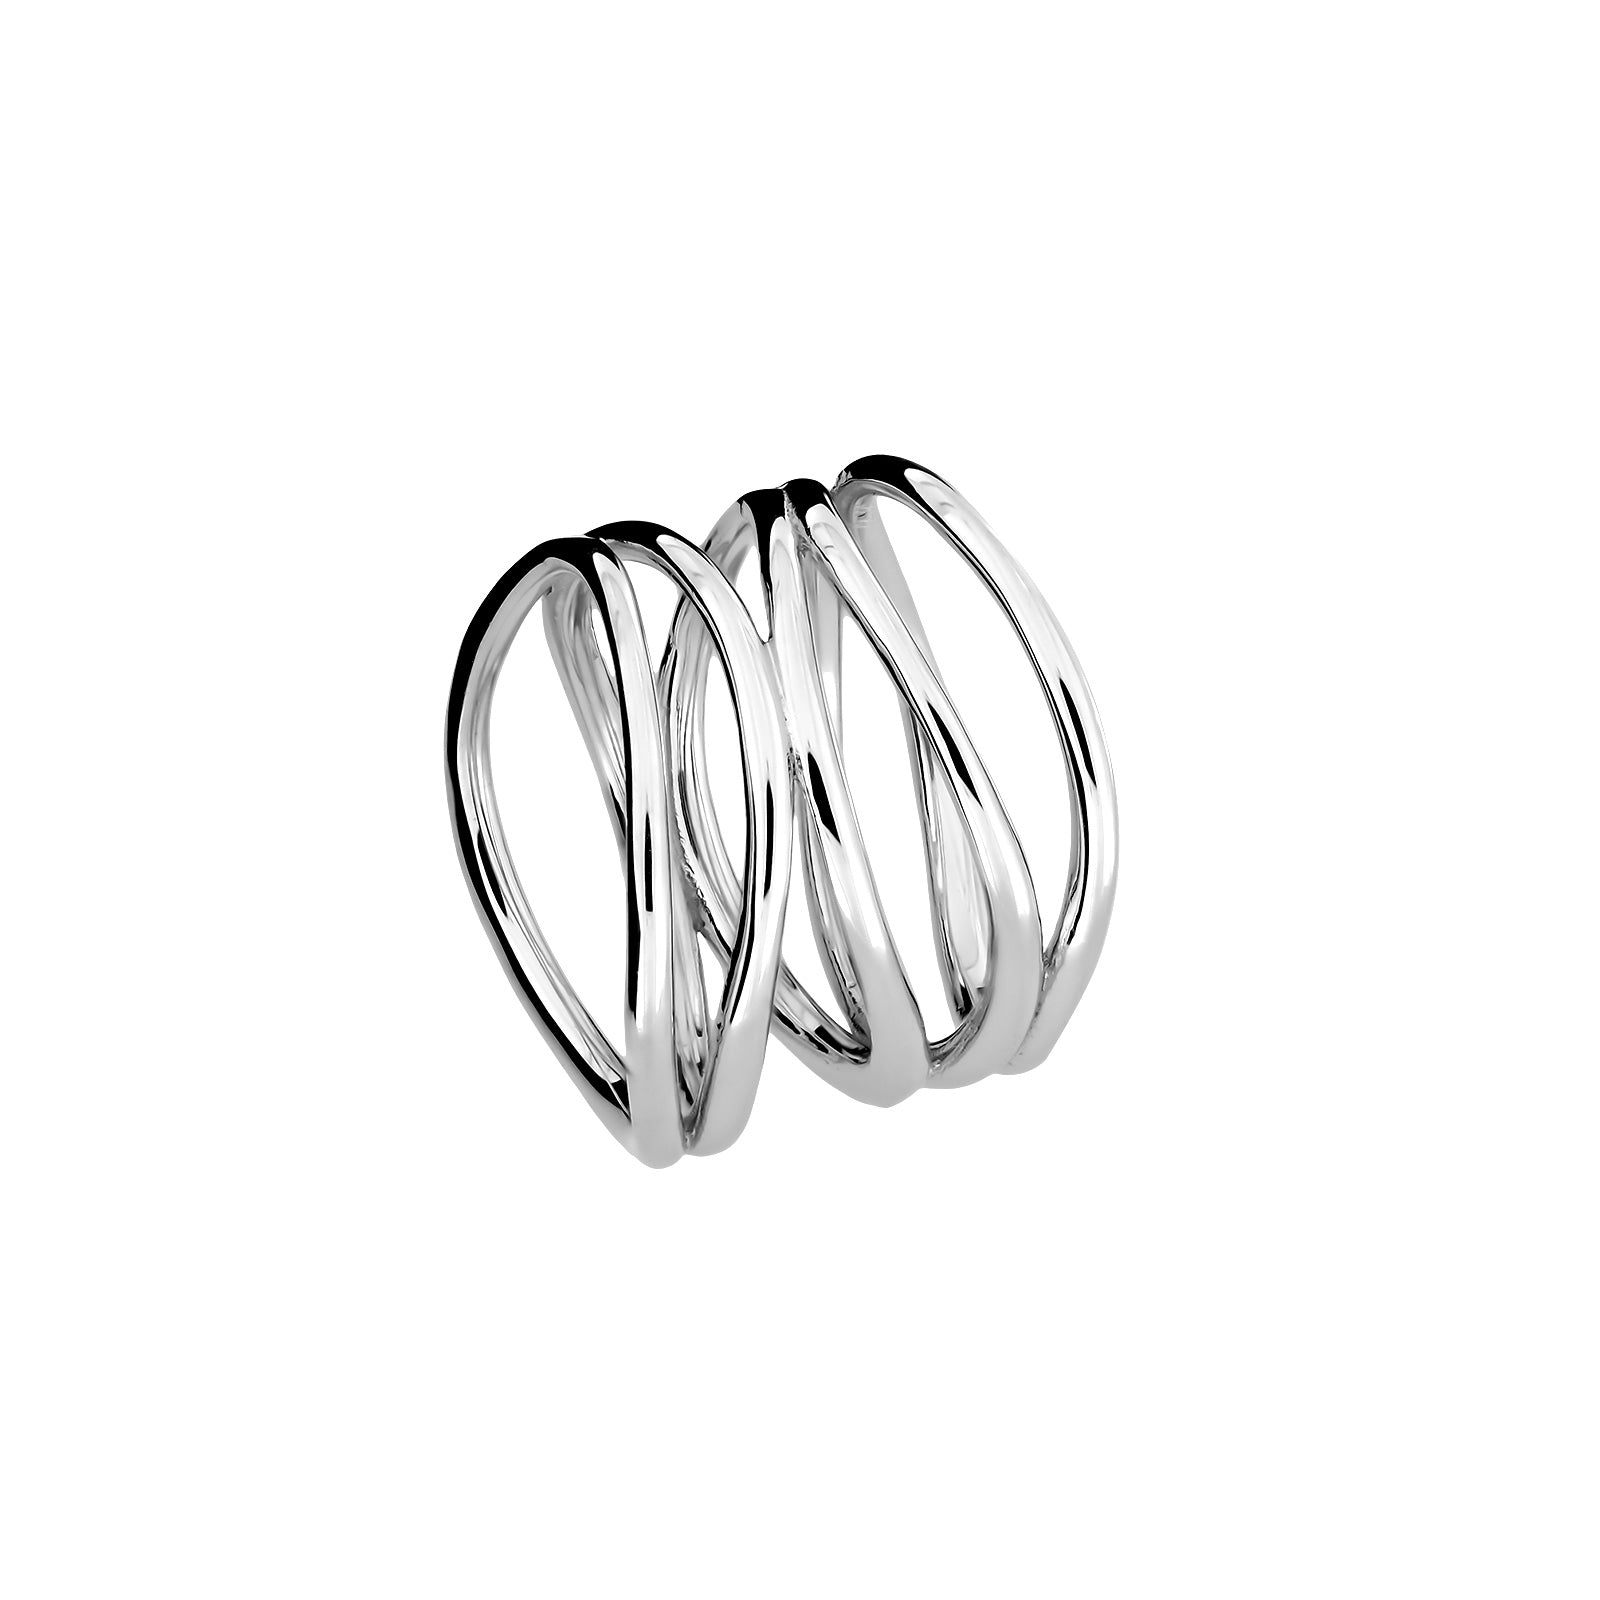 Overlapping Waves Silver Ring